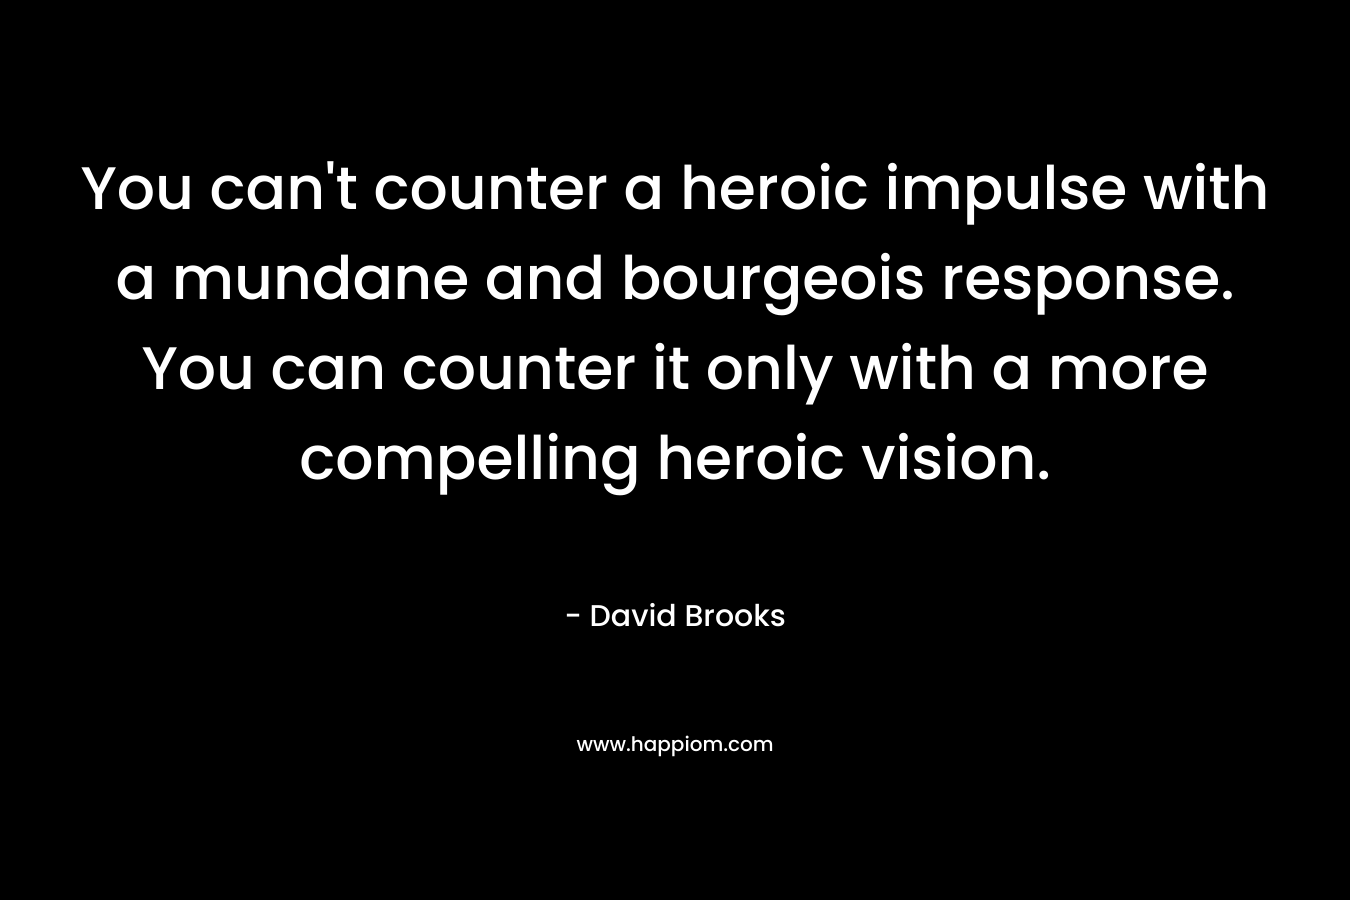 You can't counter a heroic impulse with a mundane and bourgeois response. You can counter it only with a more compelling heroic vision.